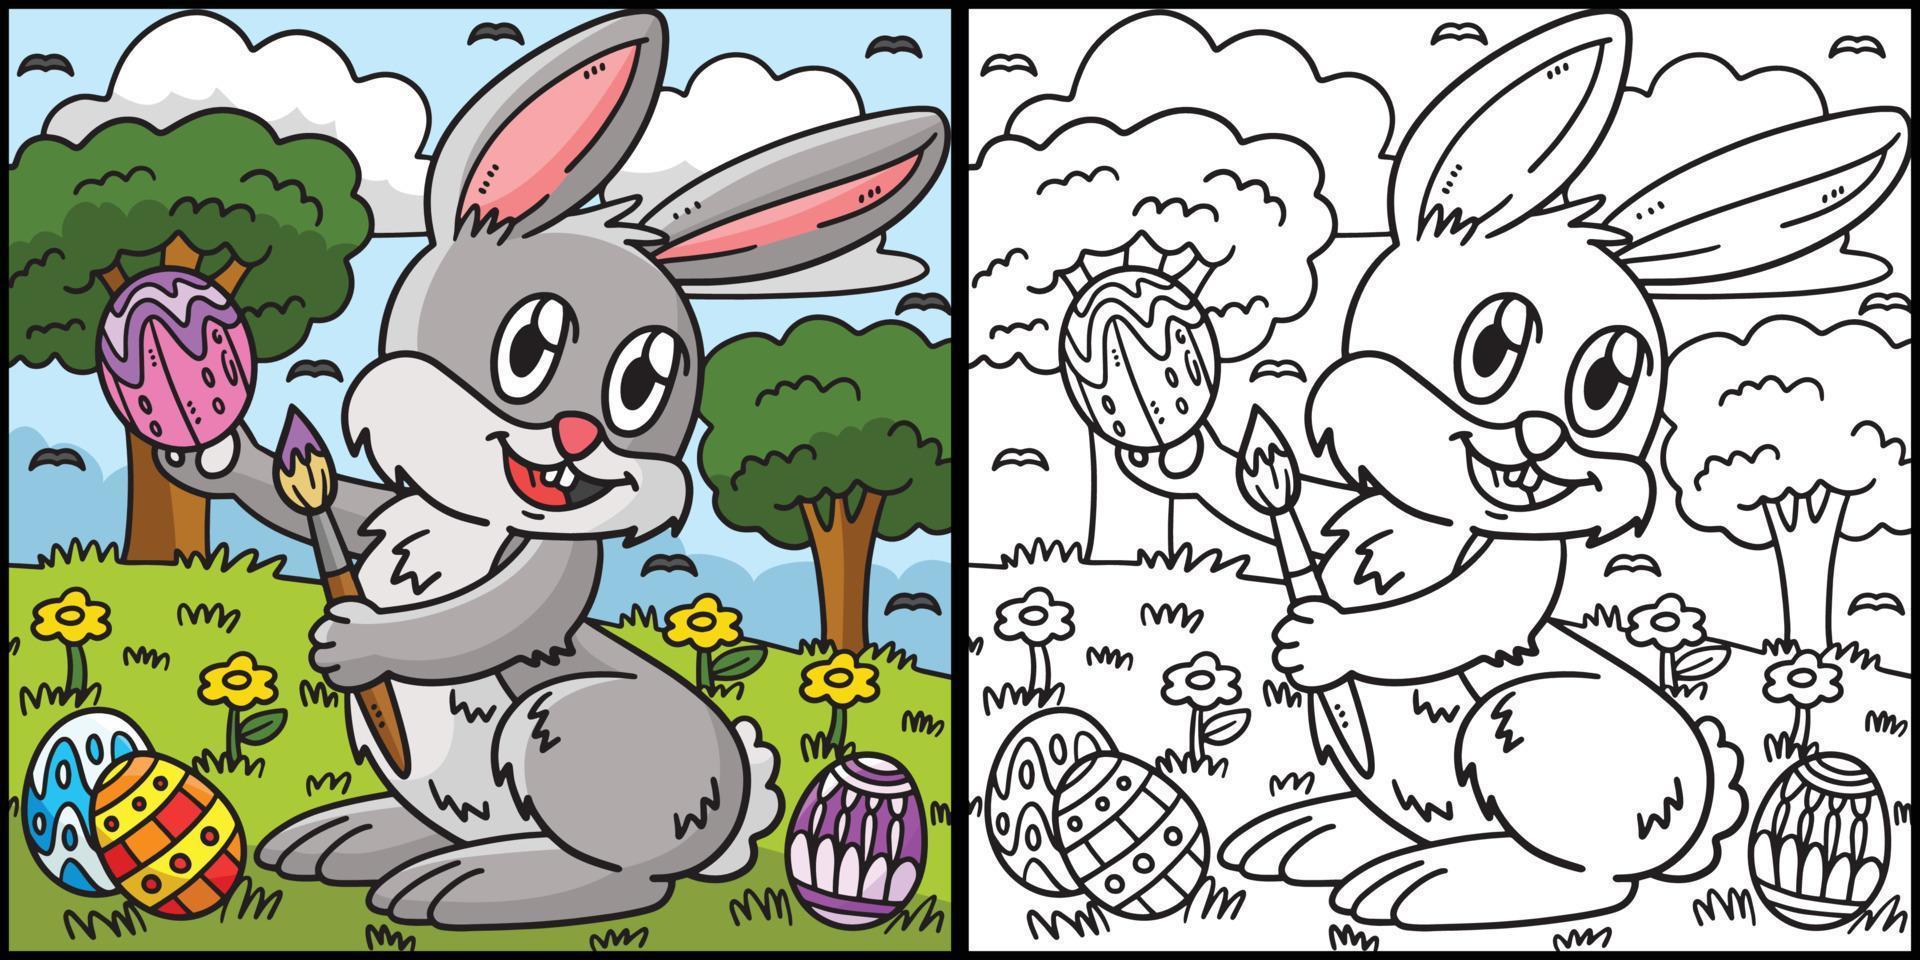 Bunny Painting Easter Egg Coloring Illustration vector